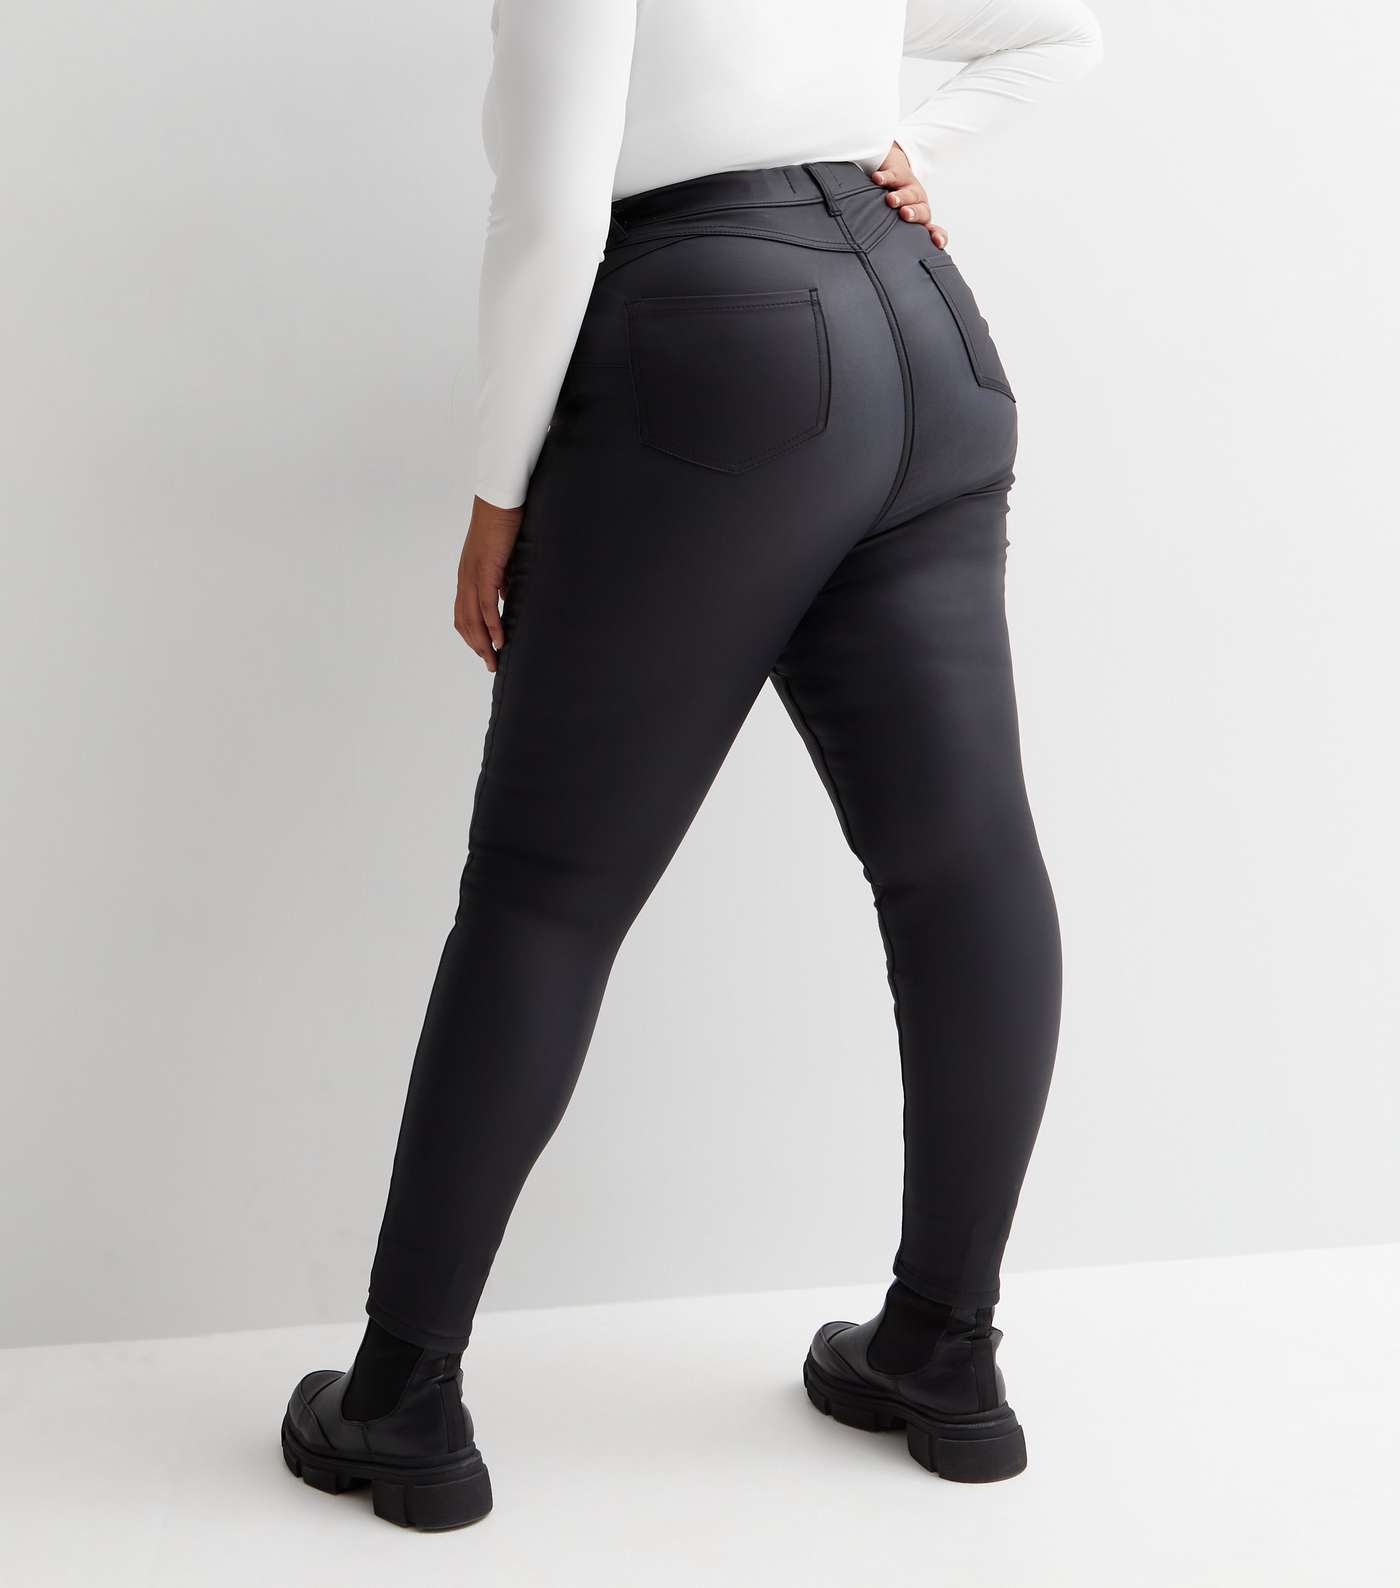 Curves Black Coated Leather-Look High Waist Jeggings Image 4